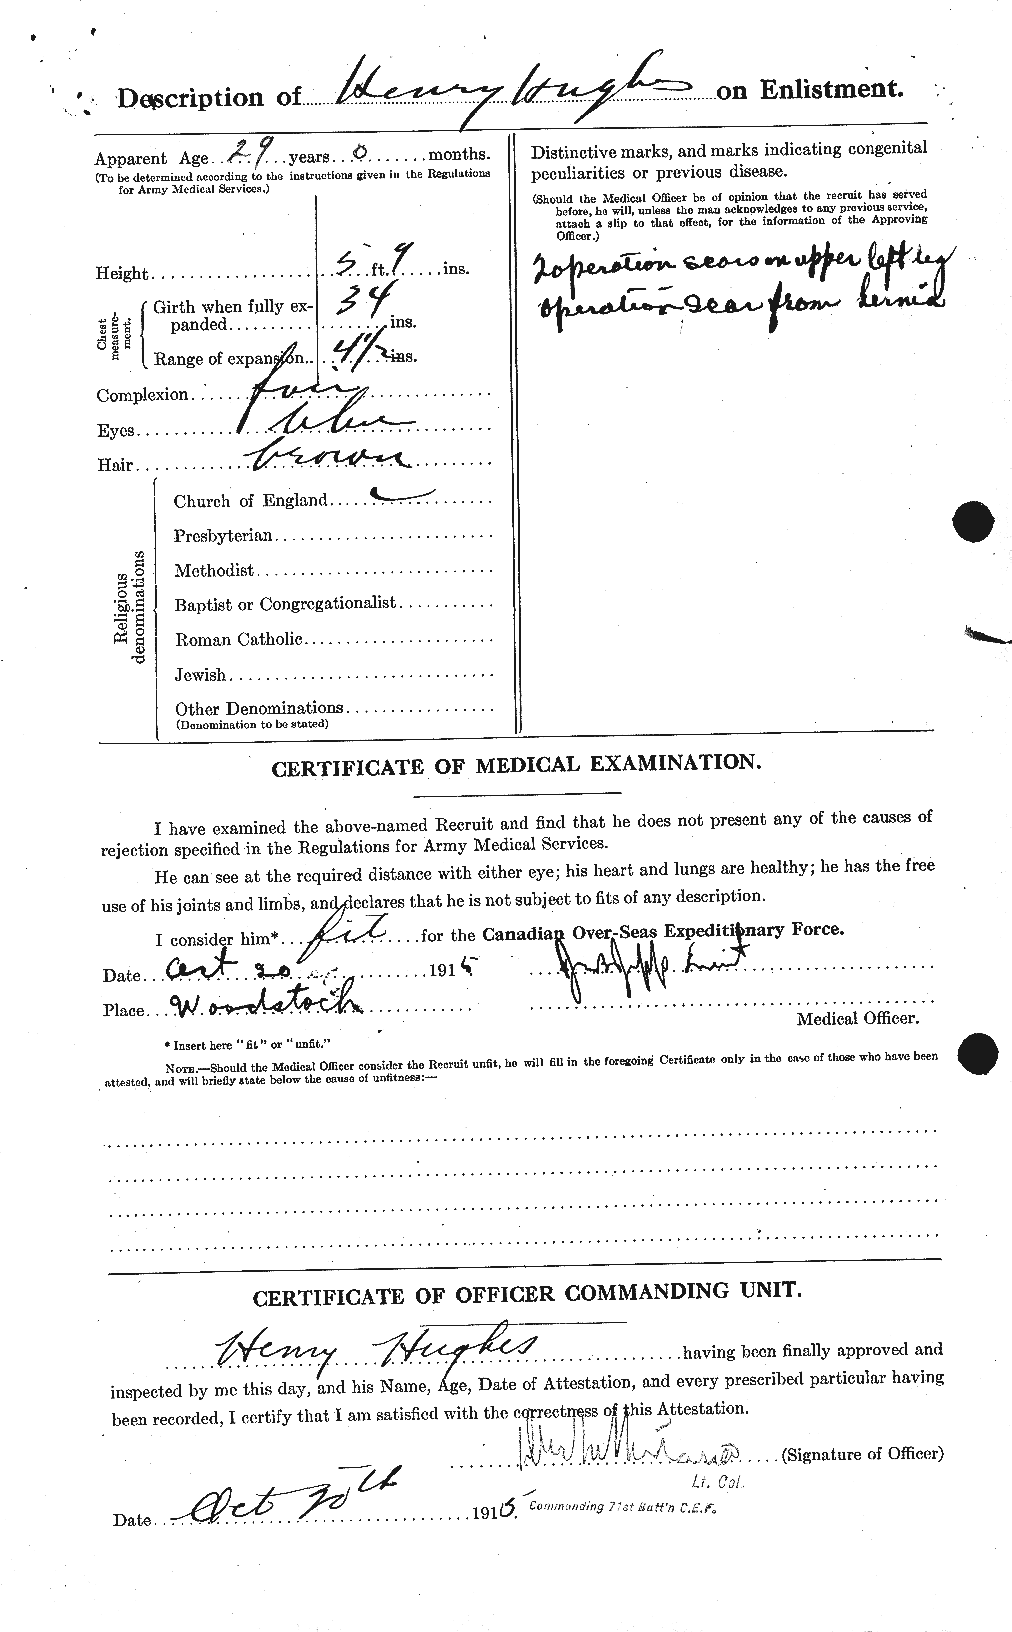 Personnel Records of the First World War - CEF 403862b